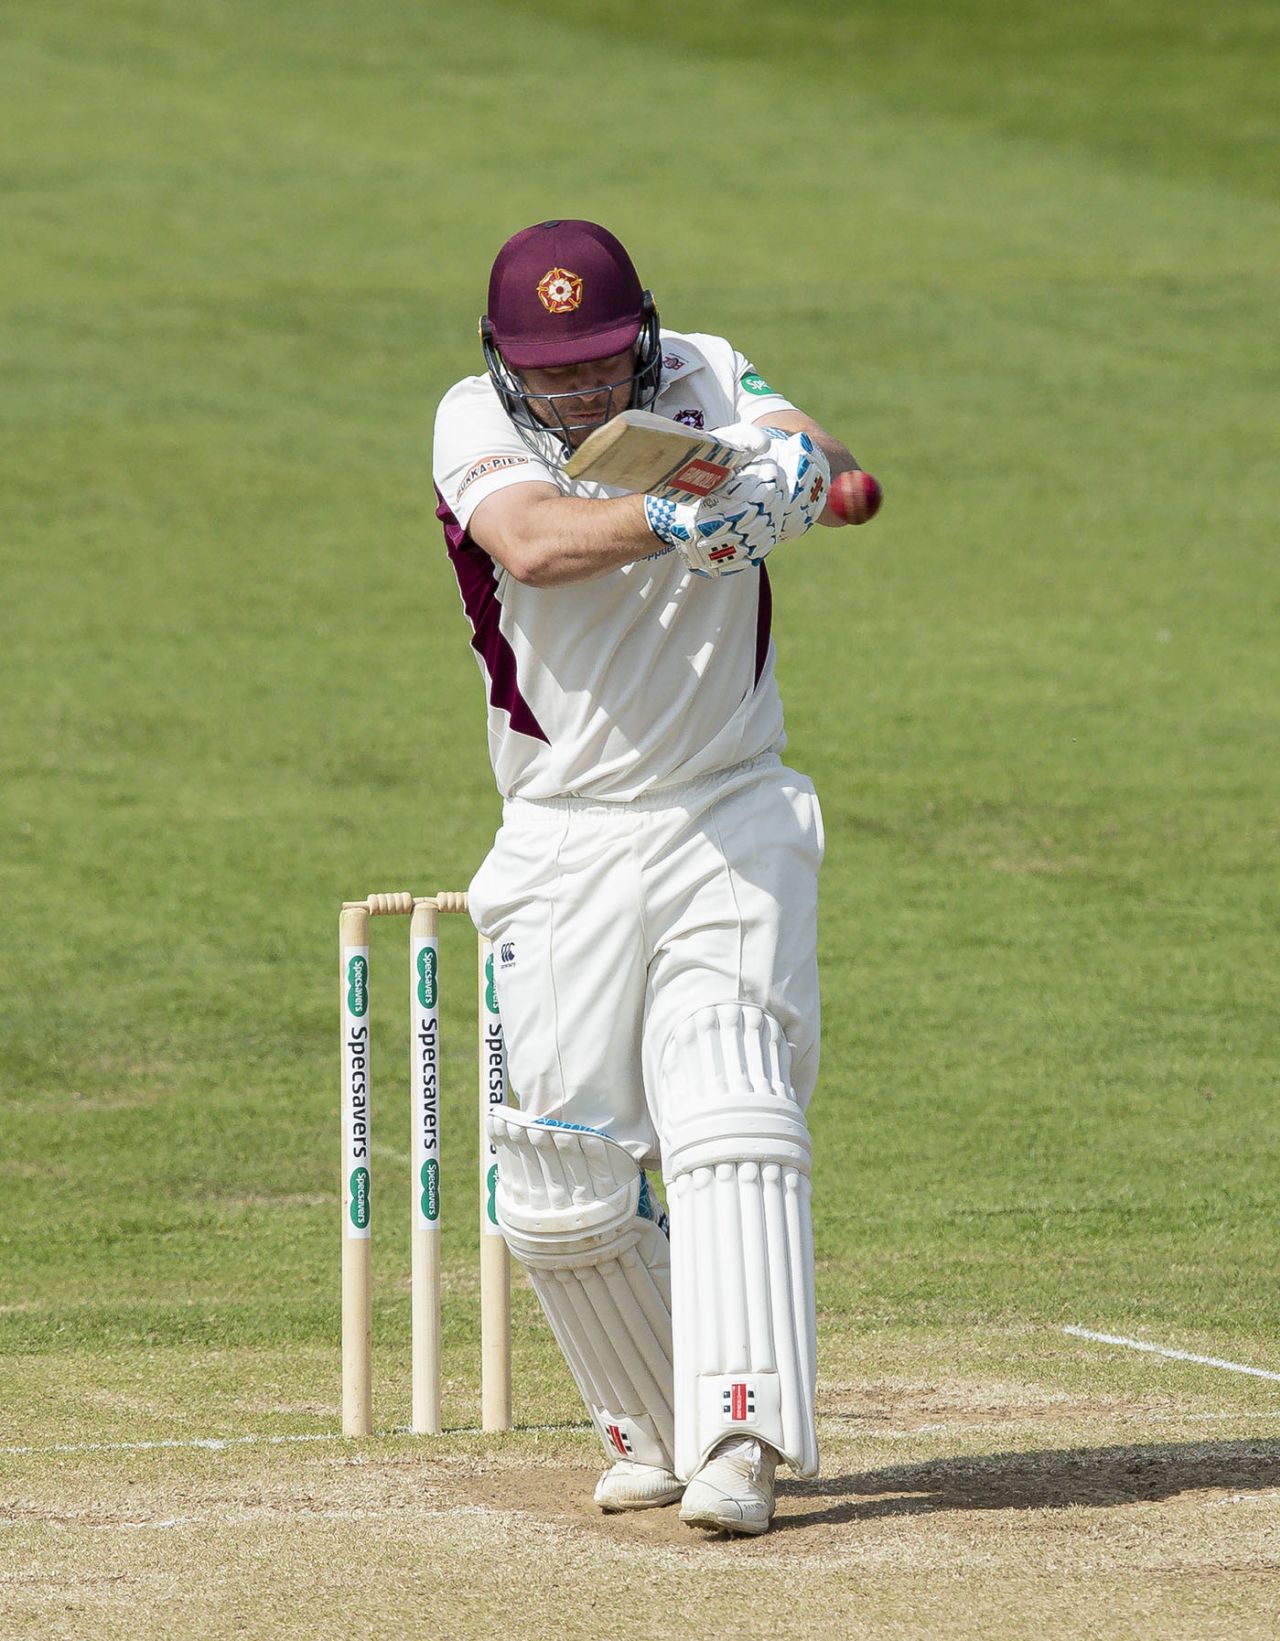 Adam Rossington in action, Northamptonshire v Sussex, County Championship Division Two, The County Ground, May 23, 2019 